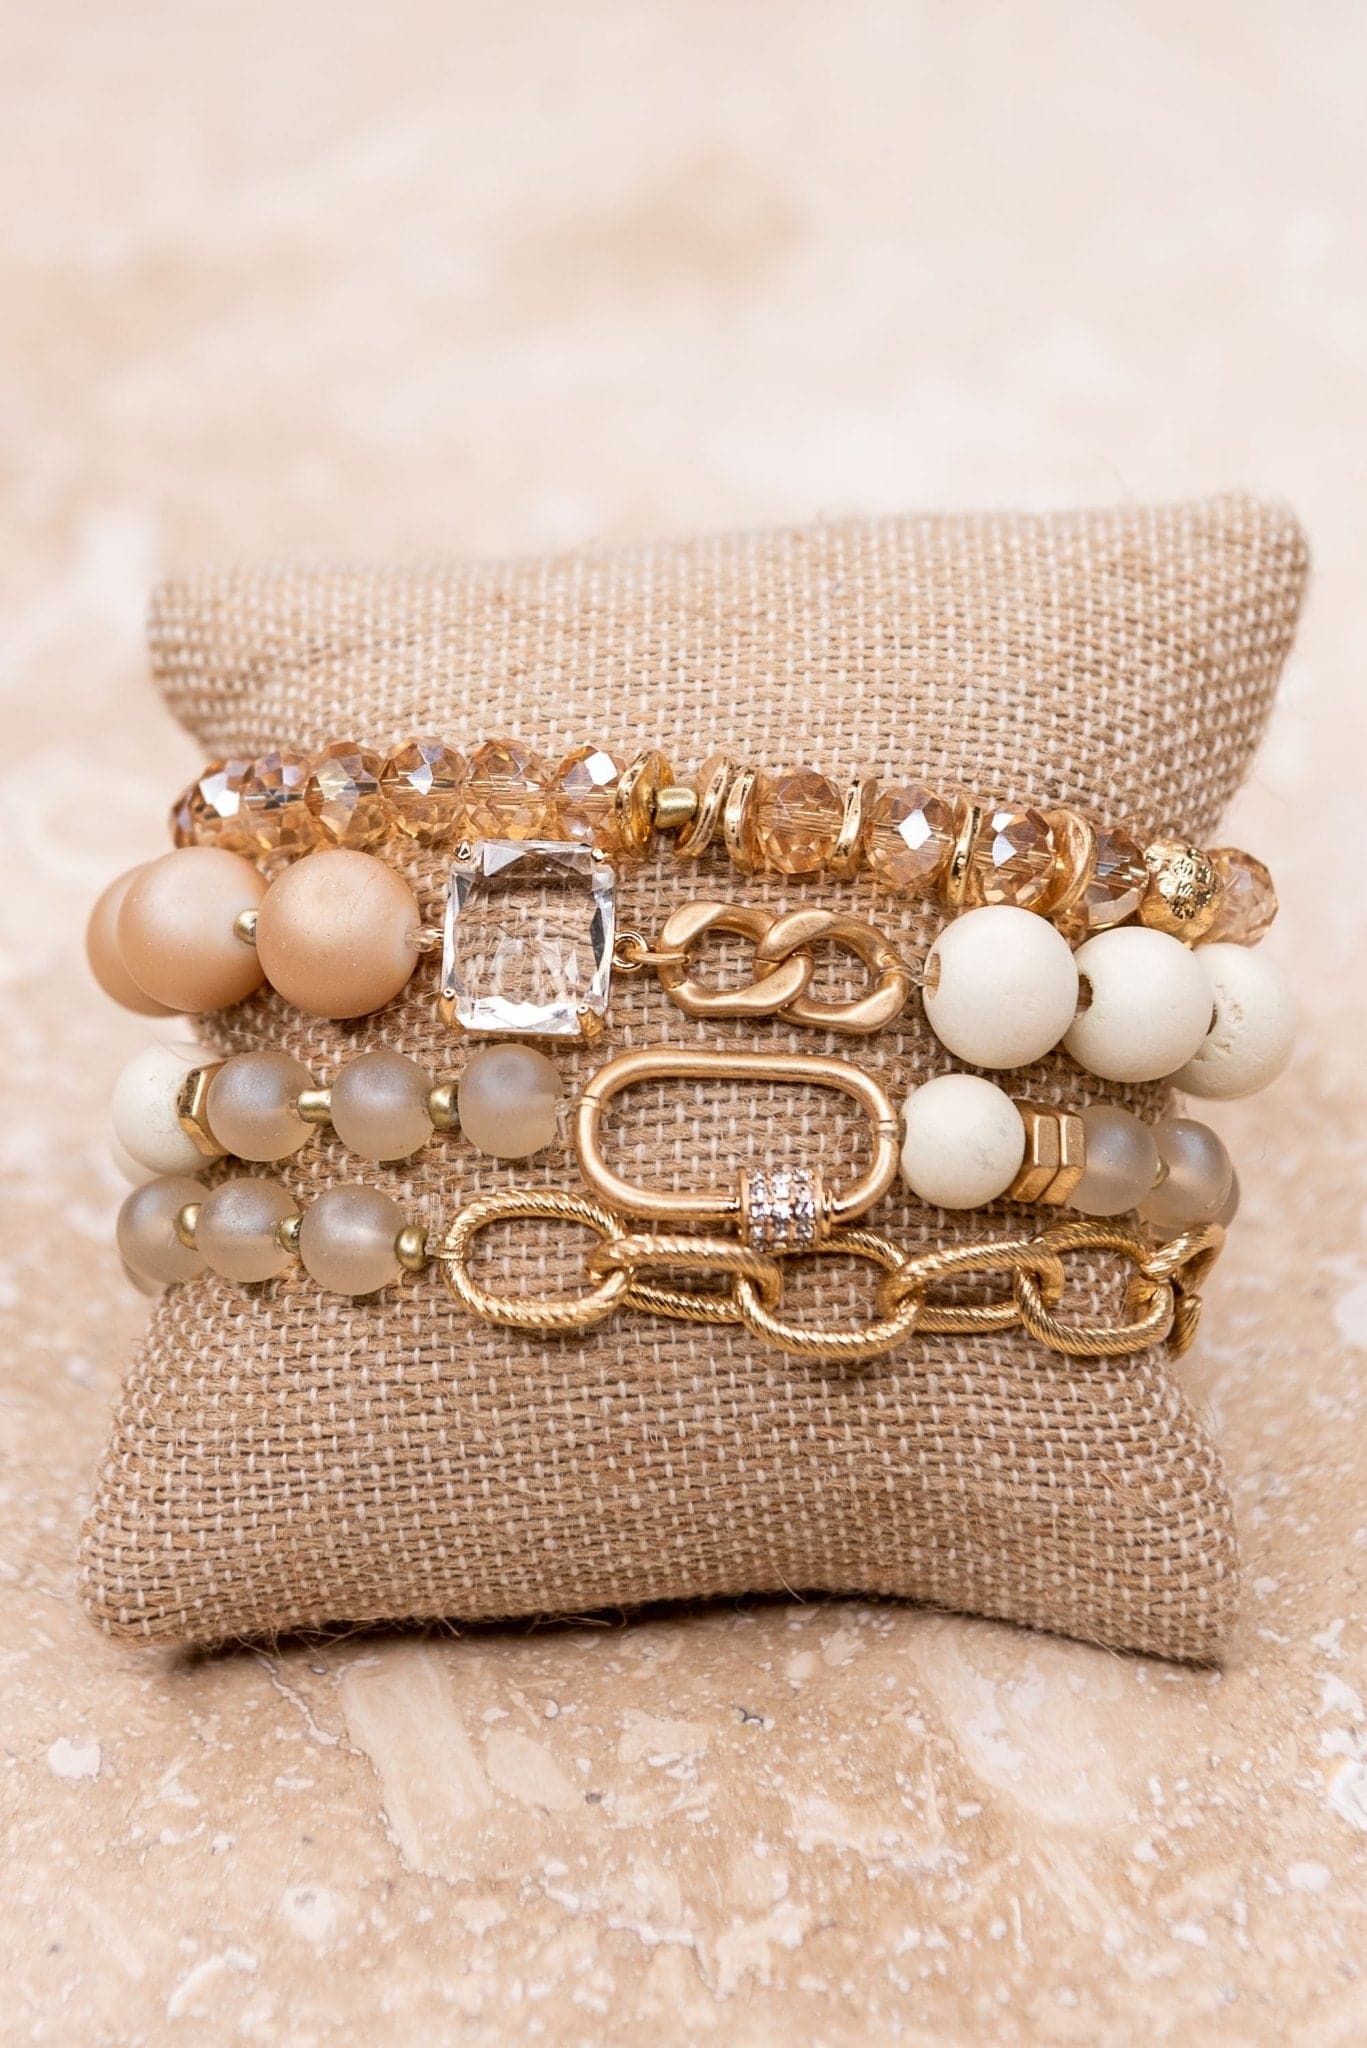 You Are Unique Beaded Stretch Bracelet Set Of 4 -AVAH